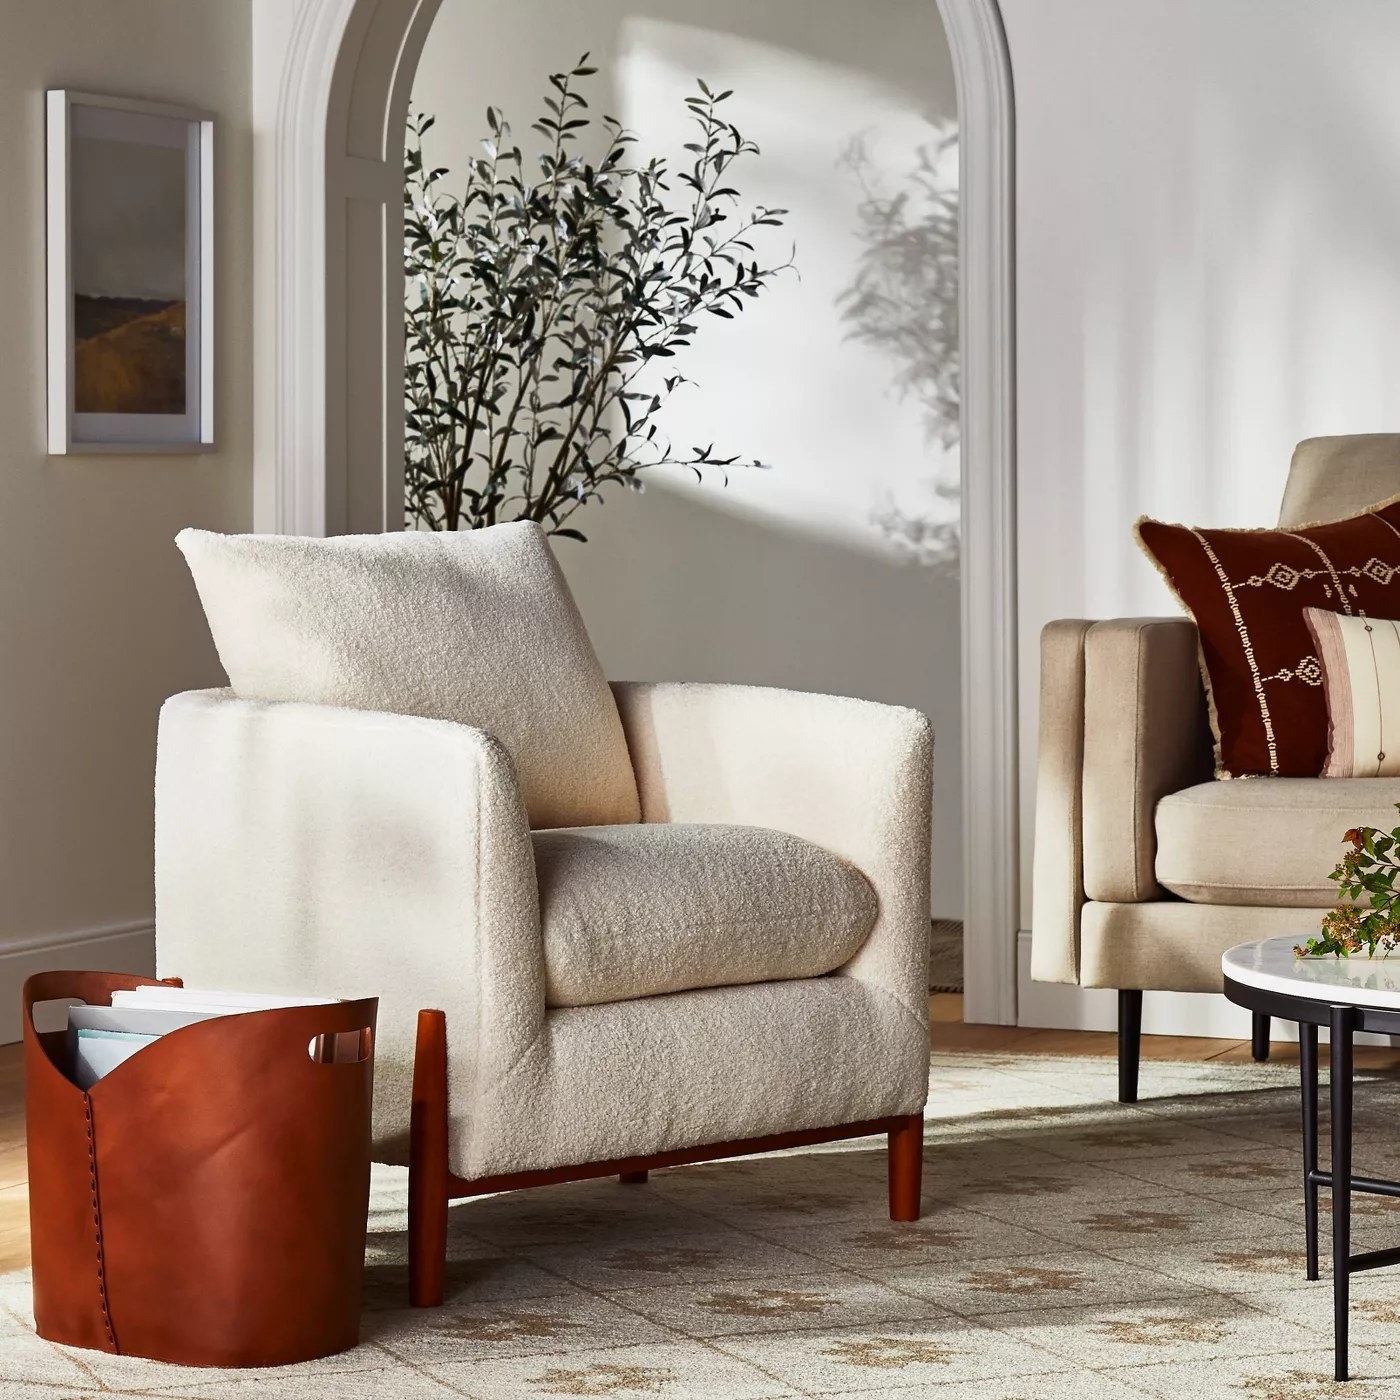 The cream sherpa accent chair with wooden legs